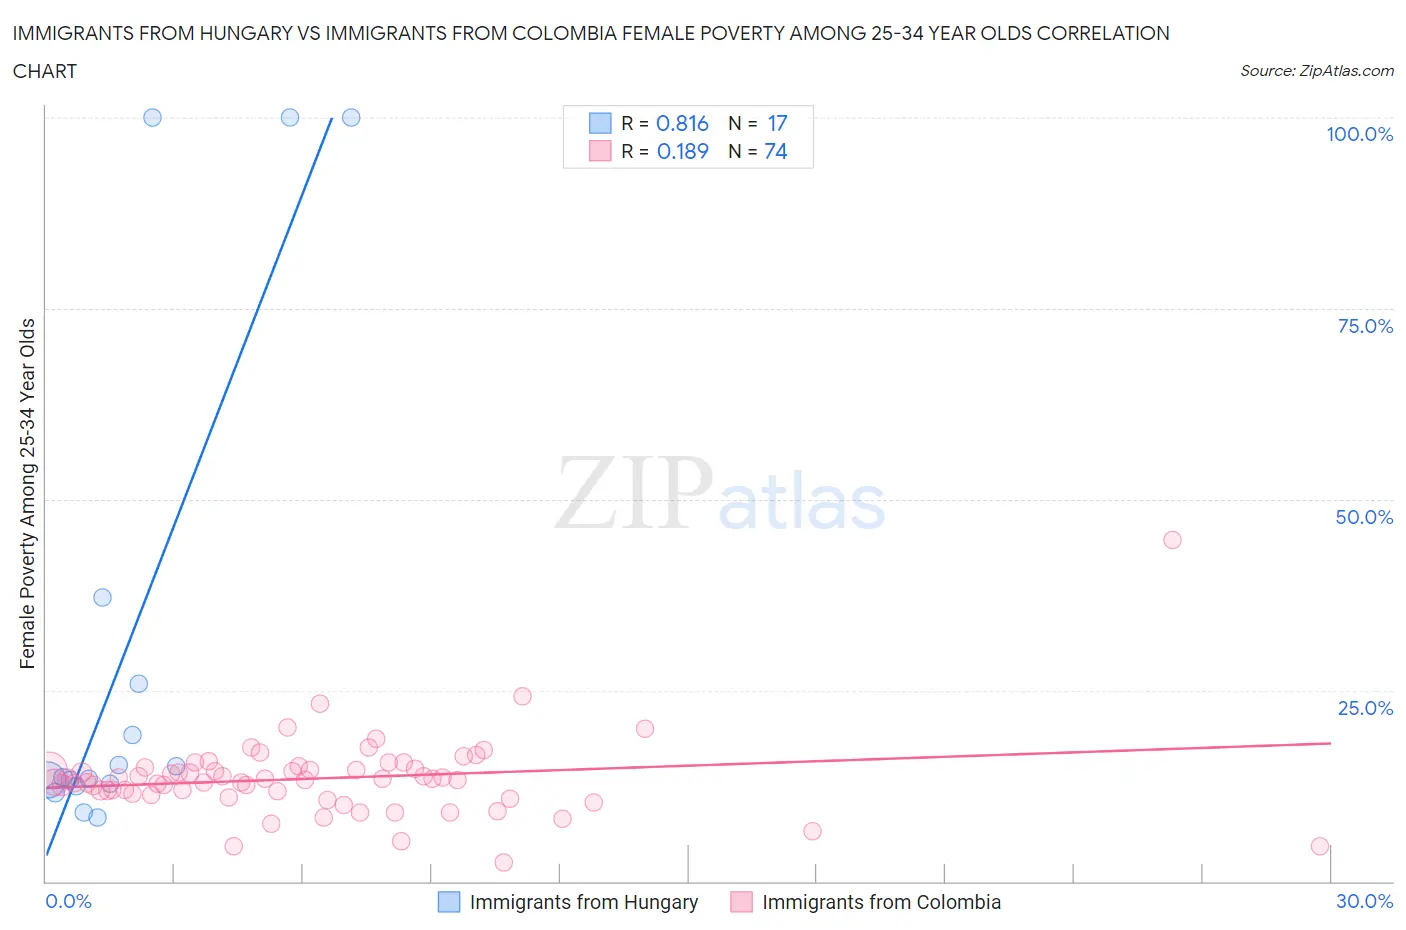 Immigrants from Hungary vs Immigrants from Colombia Female Poverty Among 25-34 Year Olds